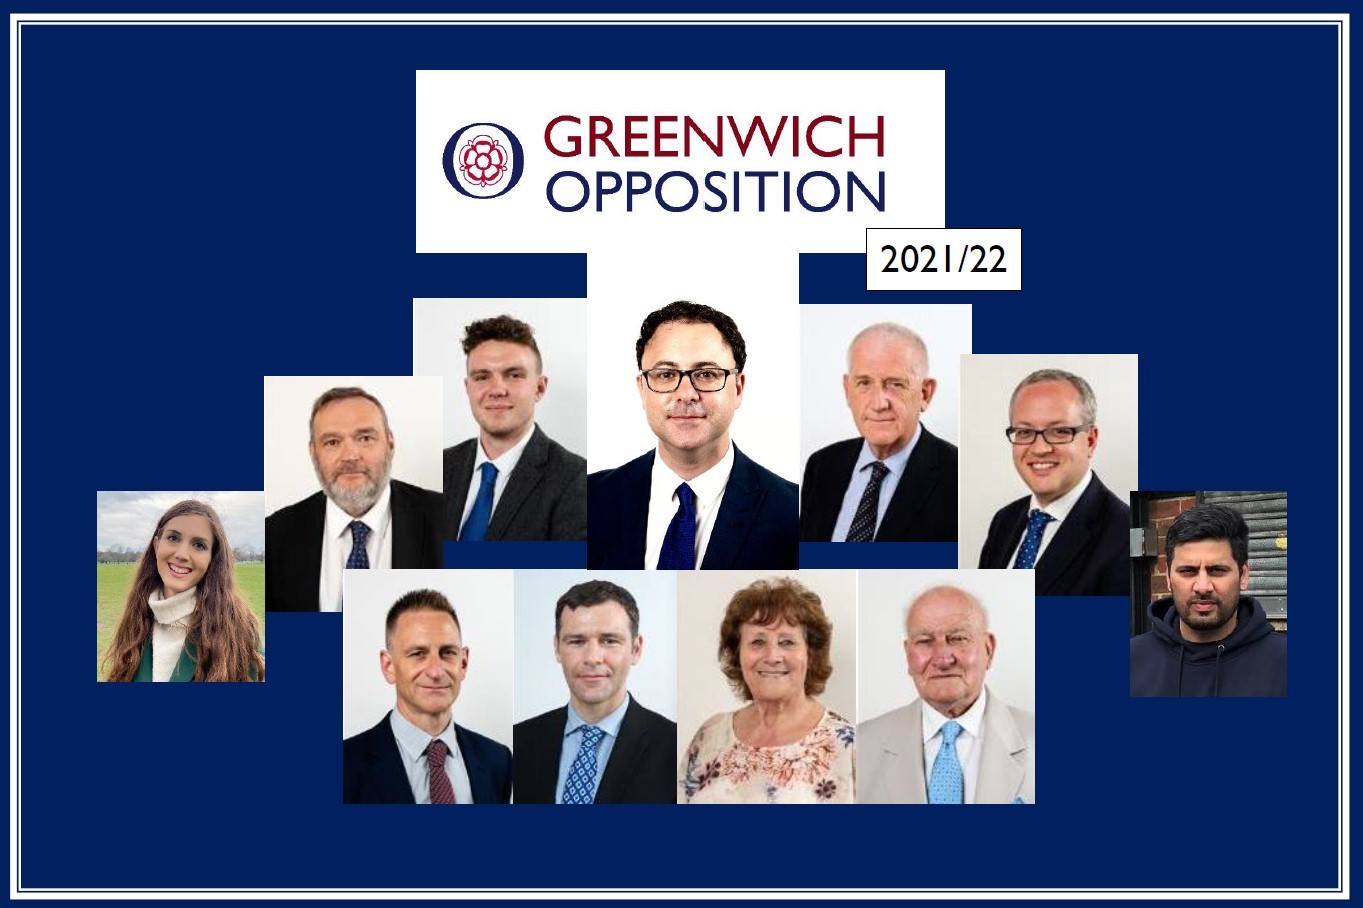 The full Opposition to Greenwich Council 